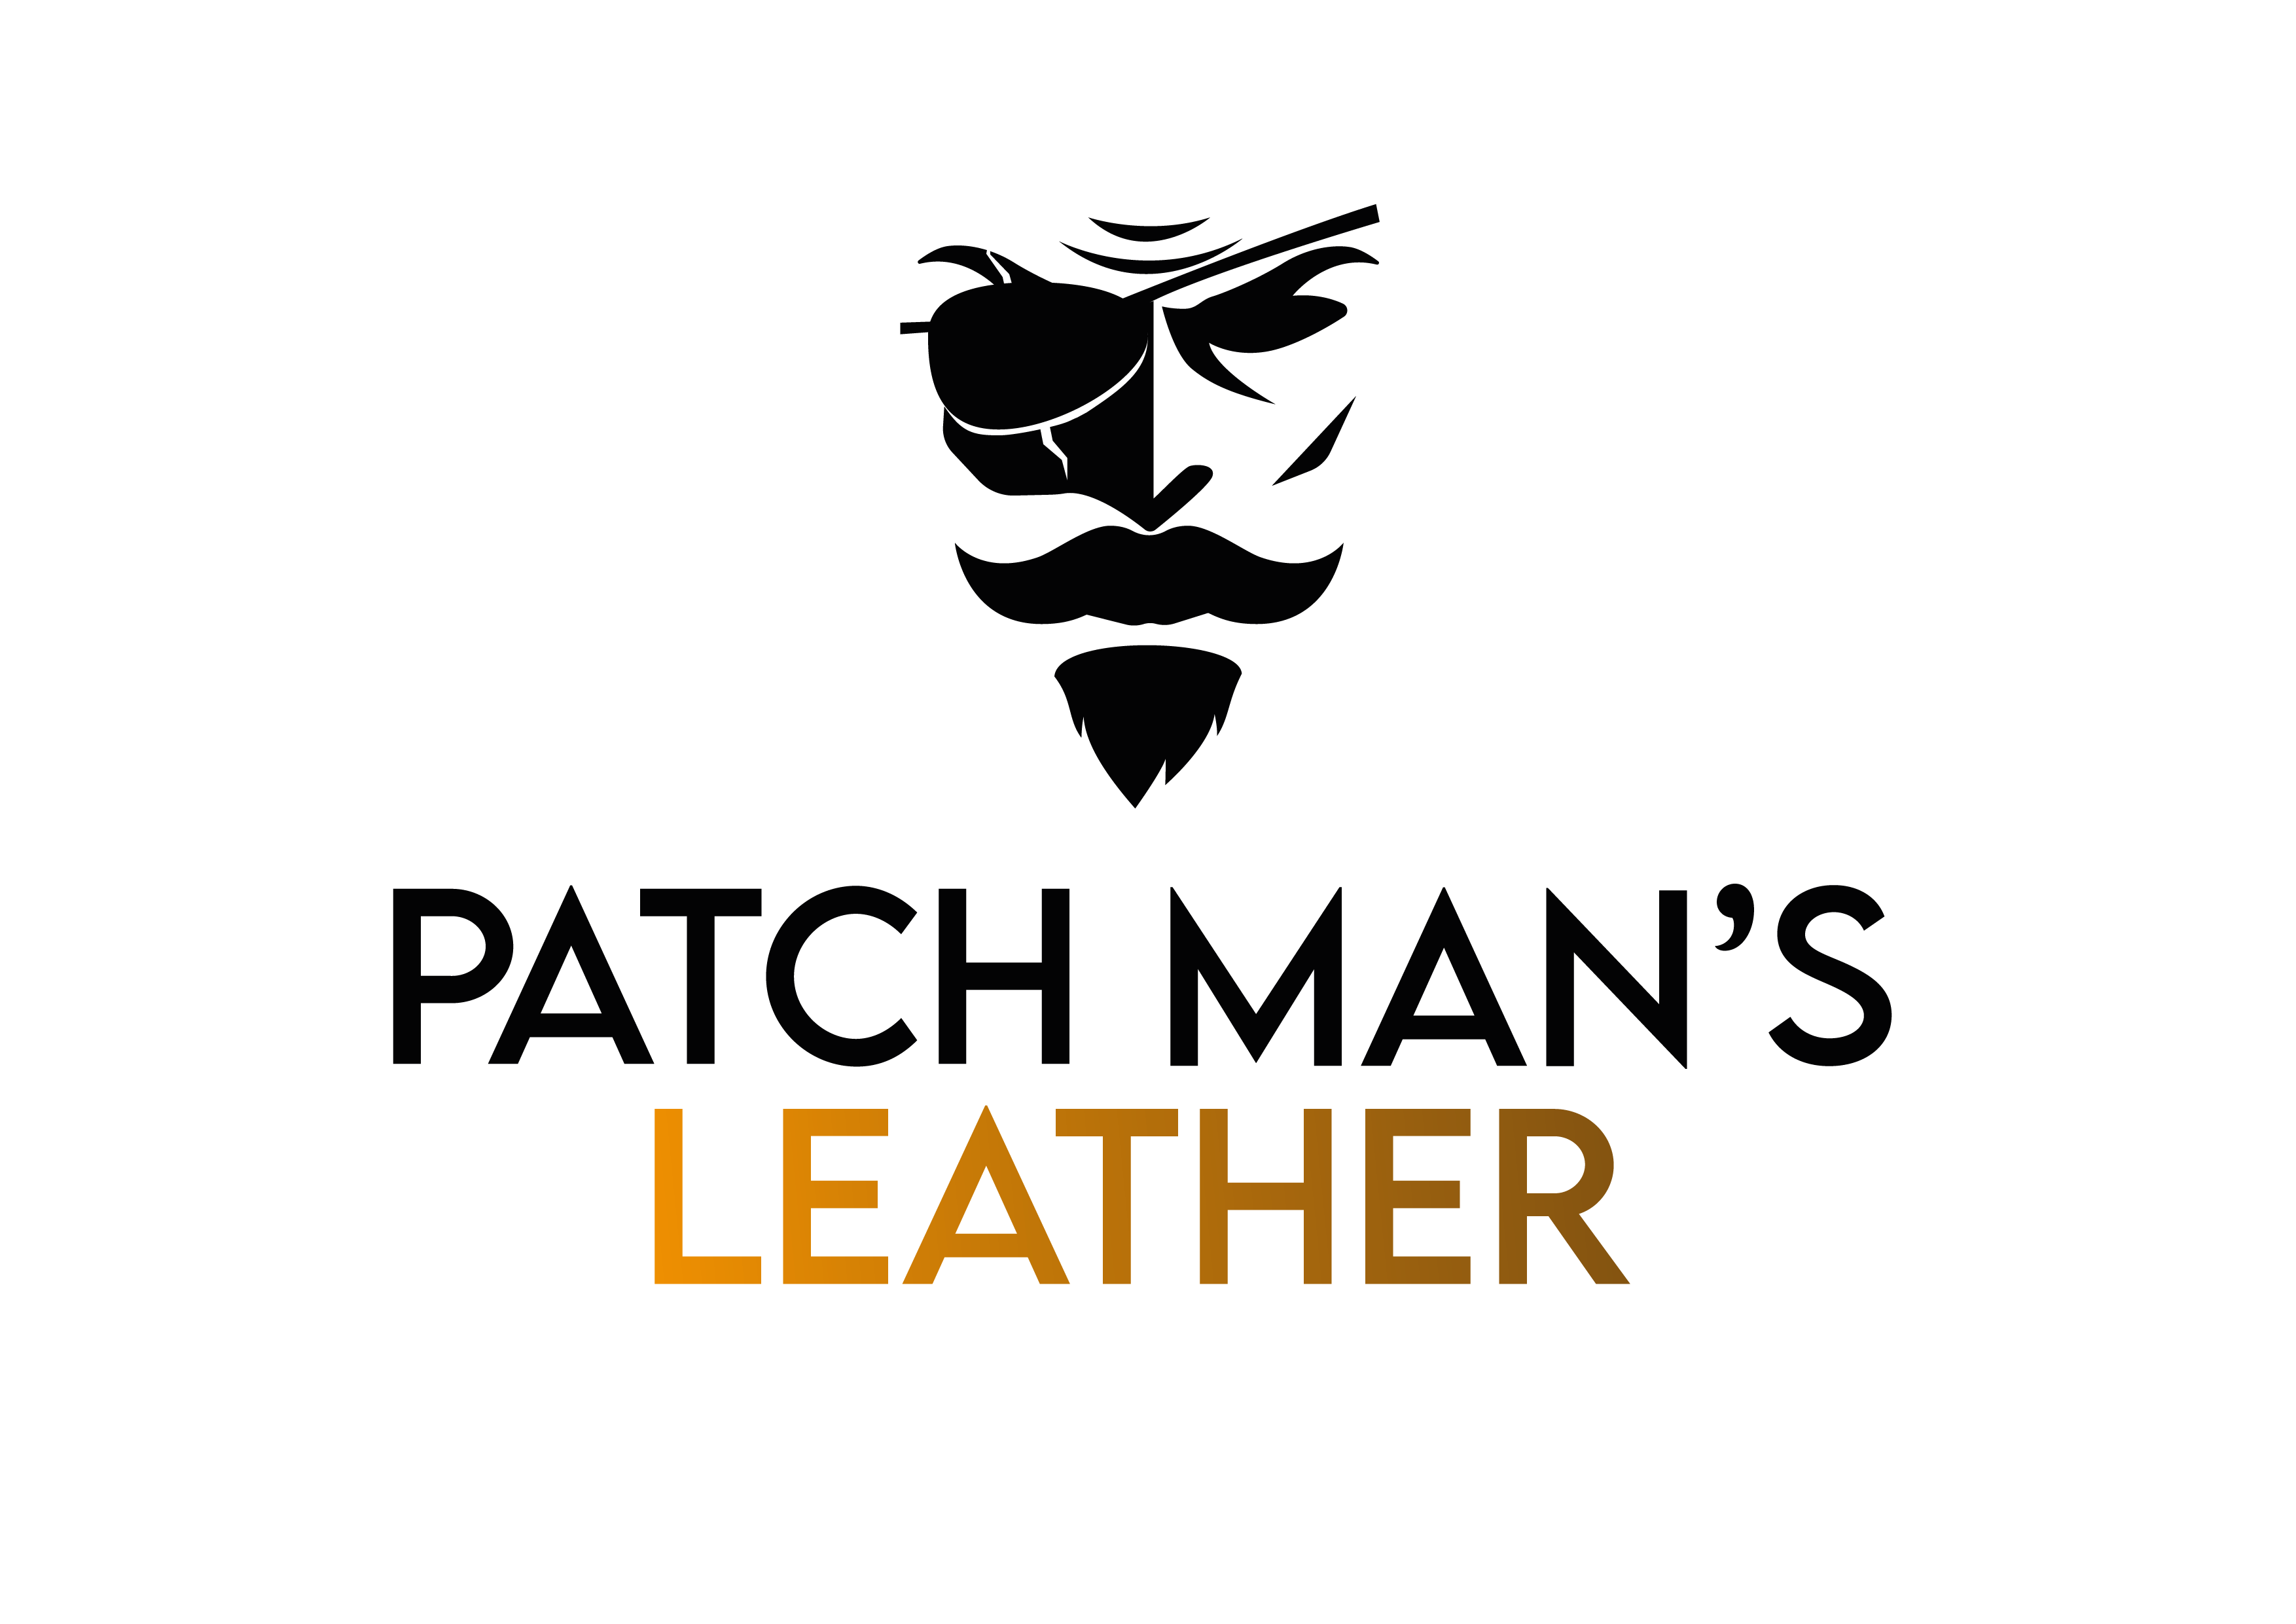 Patch Man's Leather